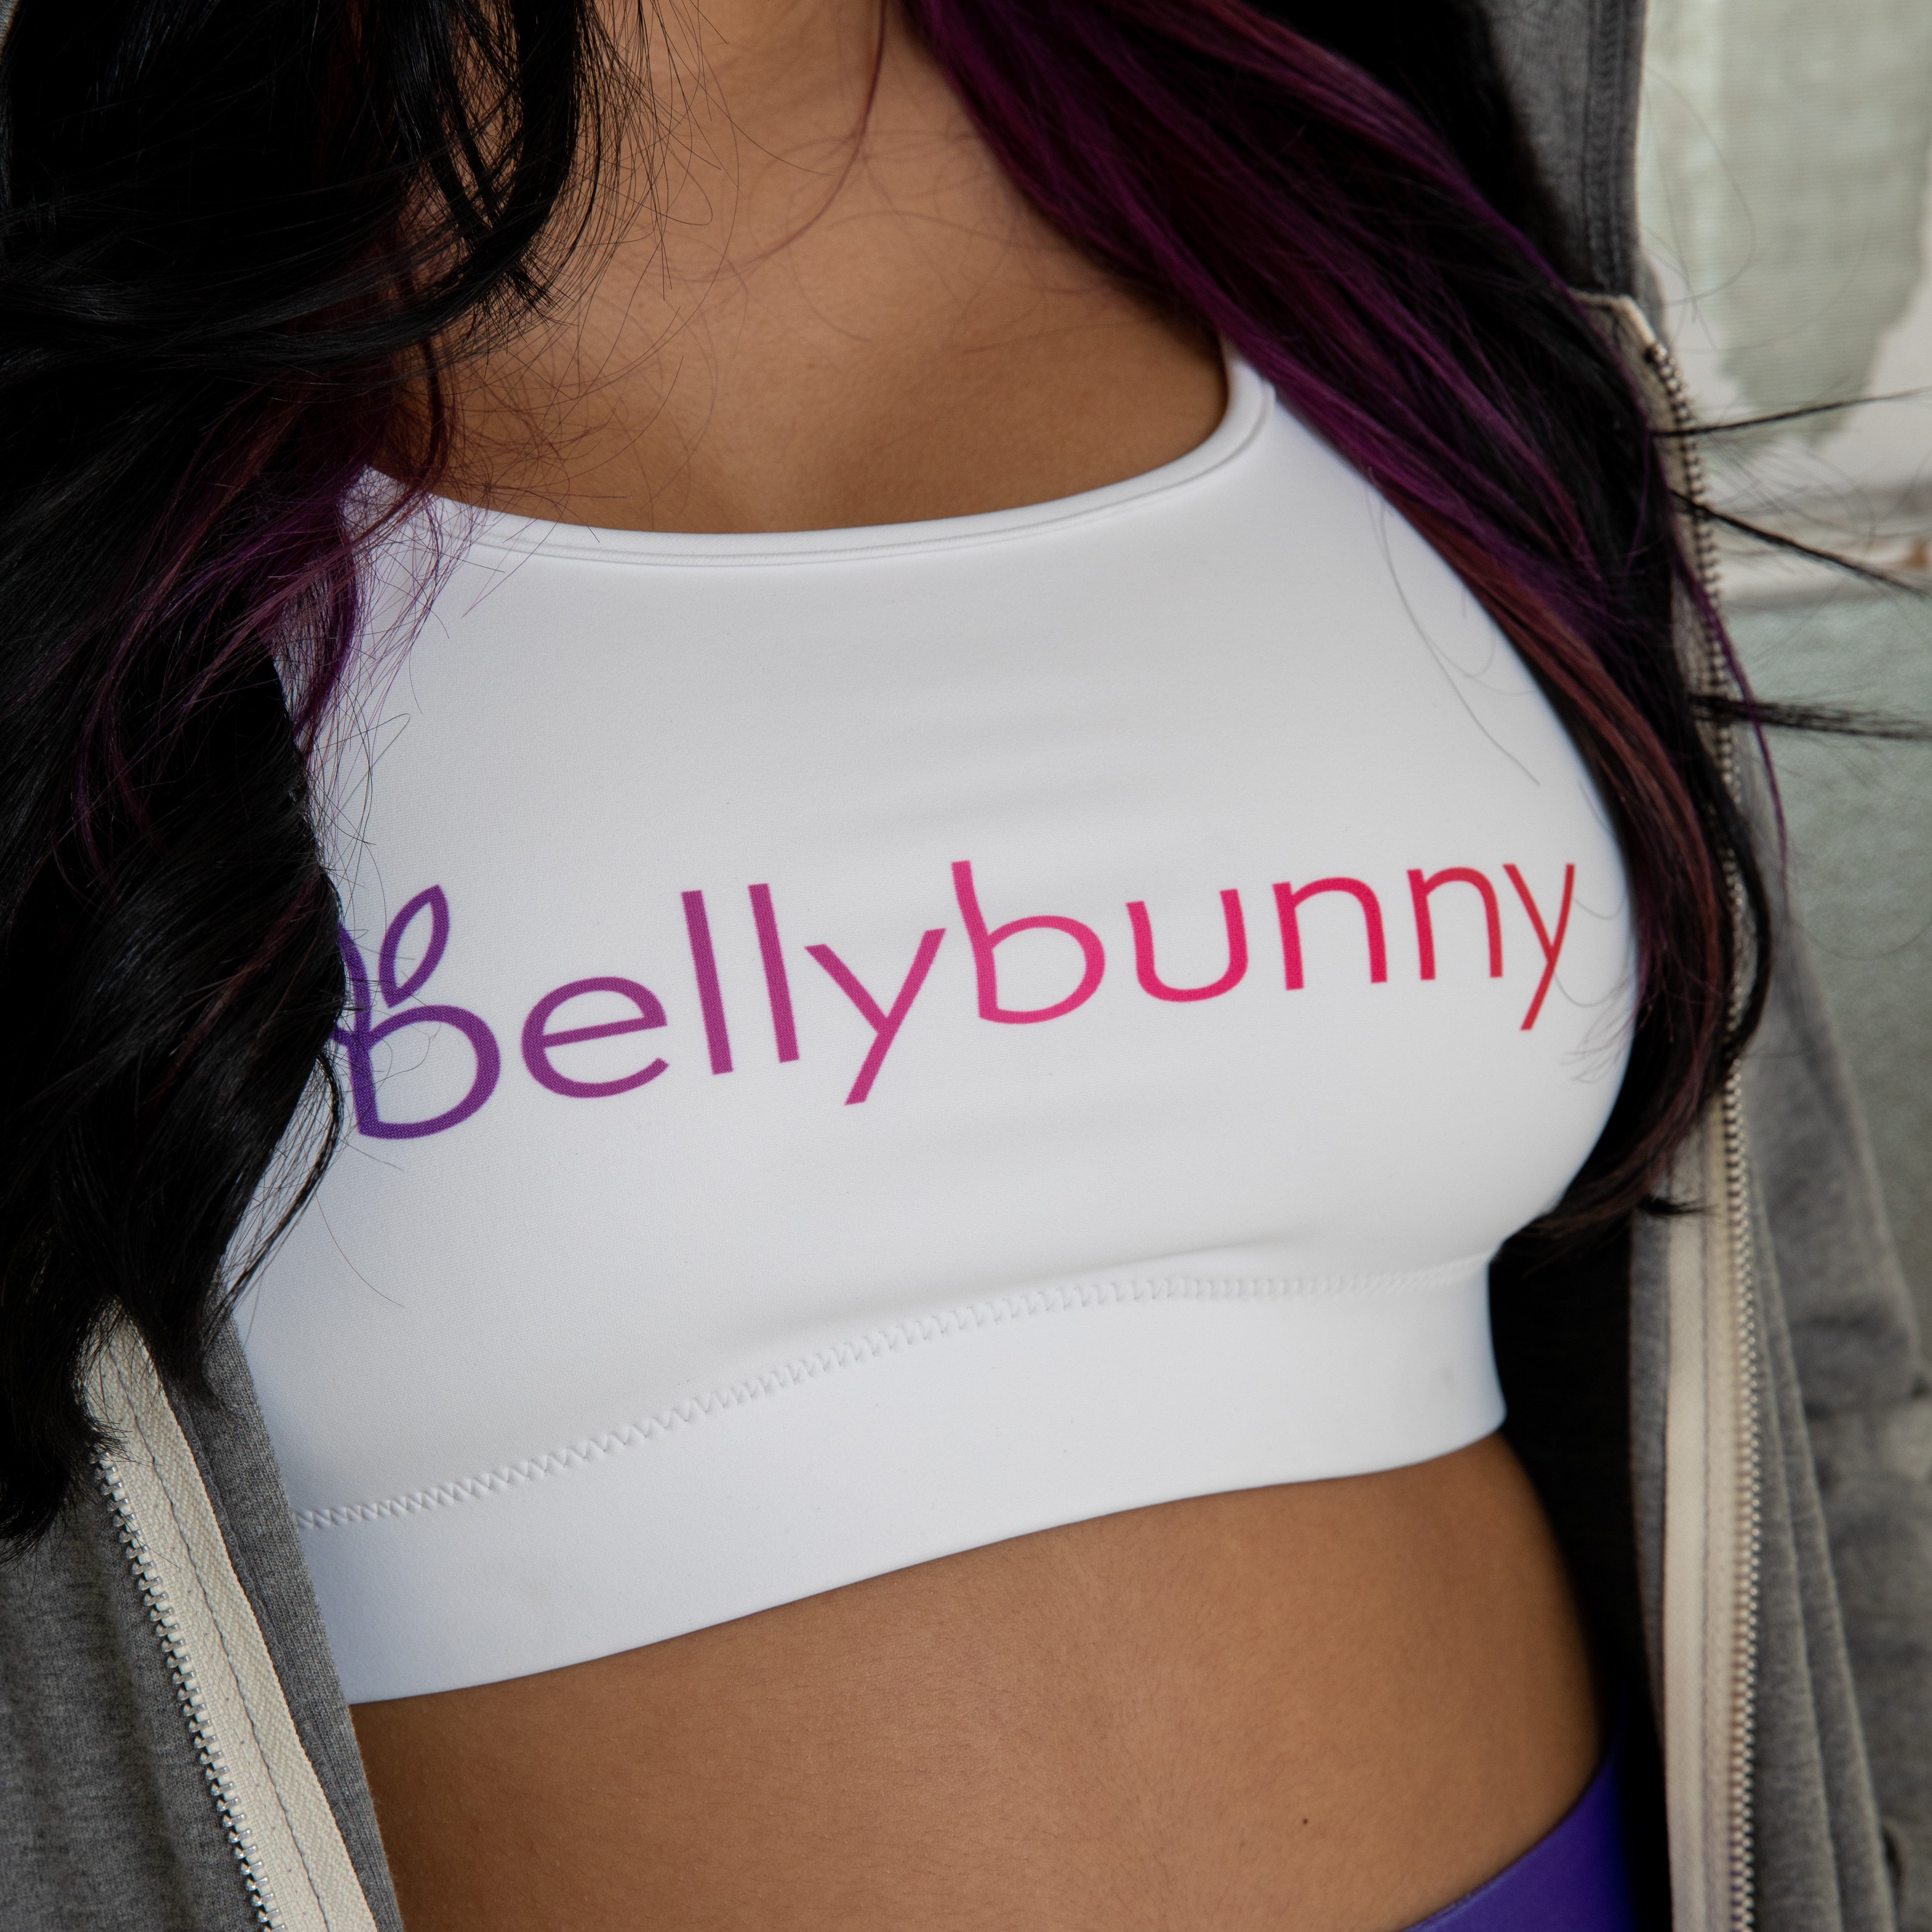 Bellybunny Sports Bra Collection, Shown with Rainbow Logo